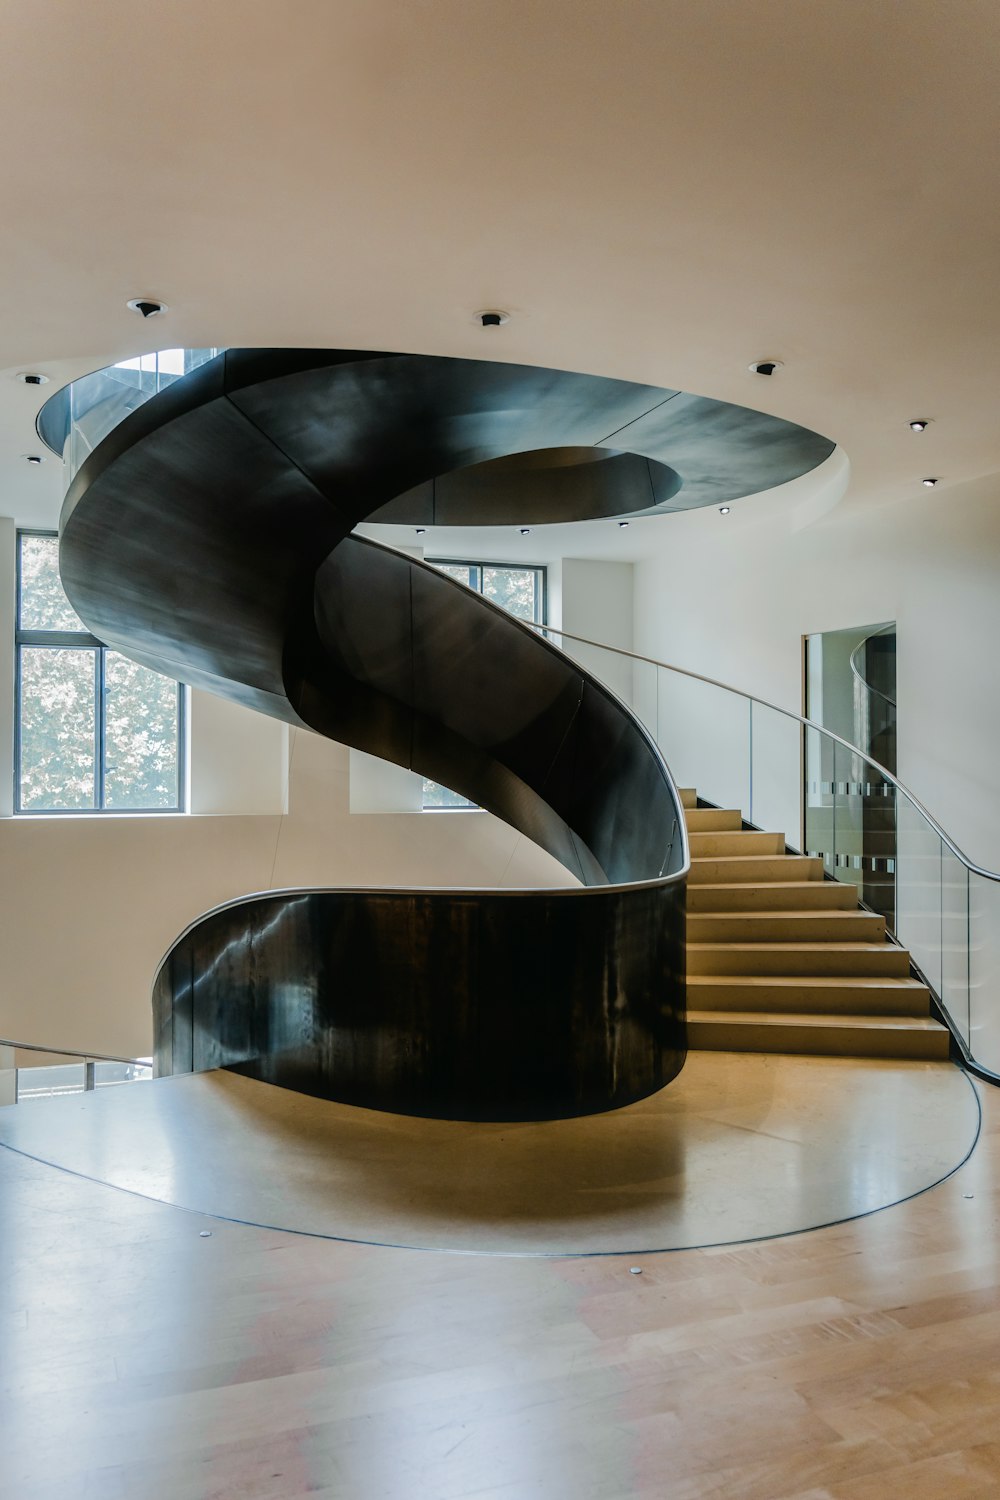 Modern stairs - huge collection of modern staircases and